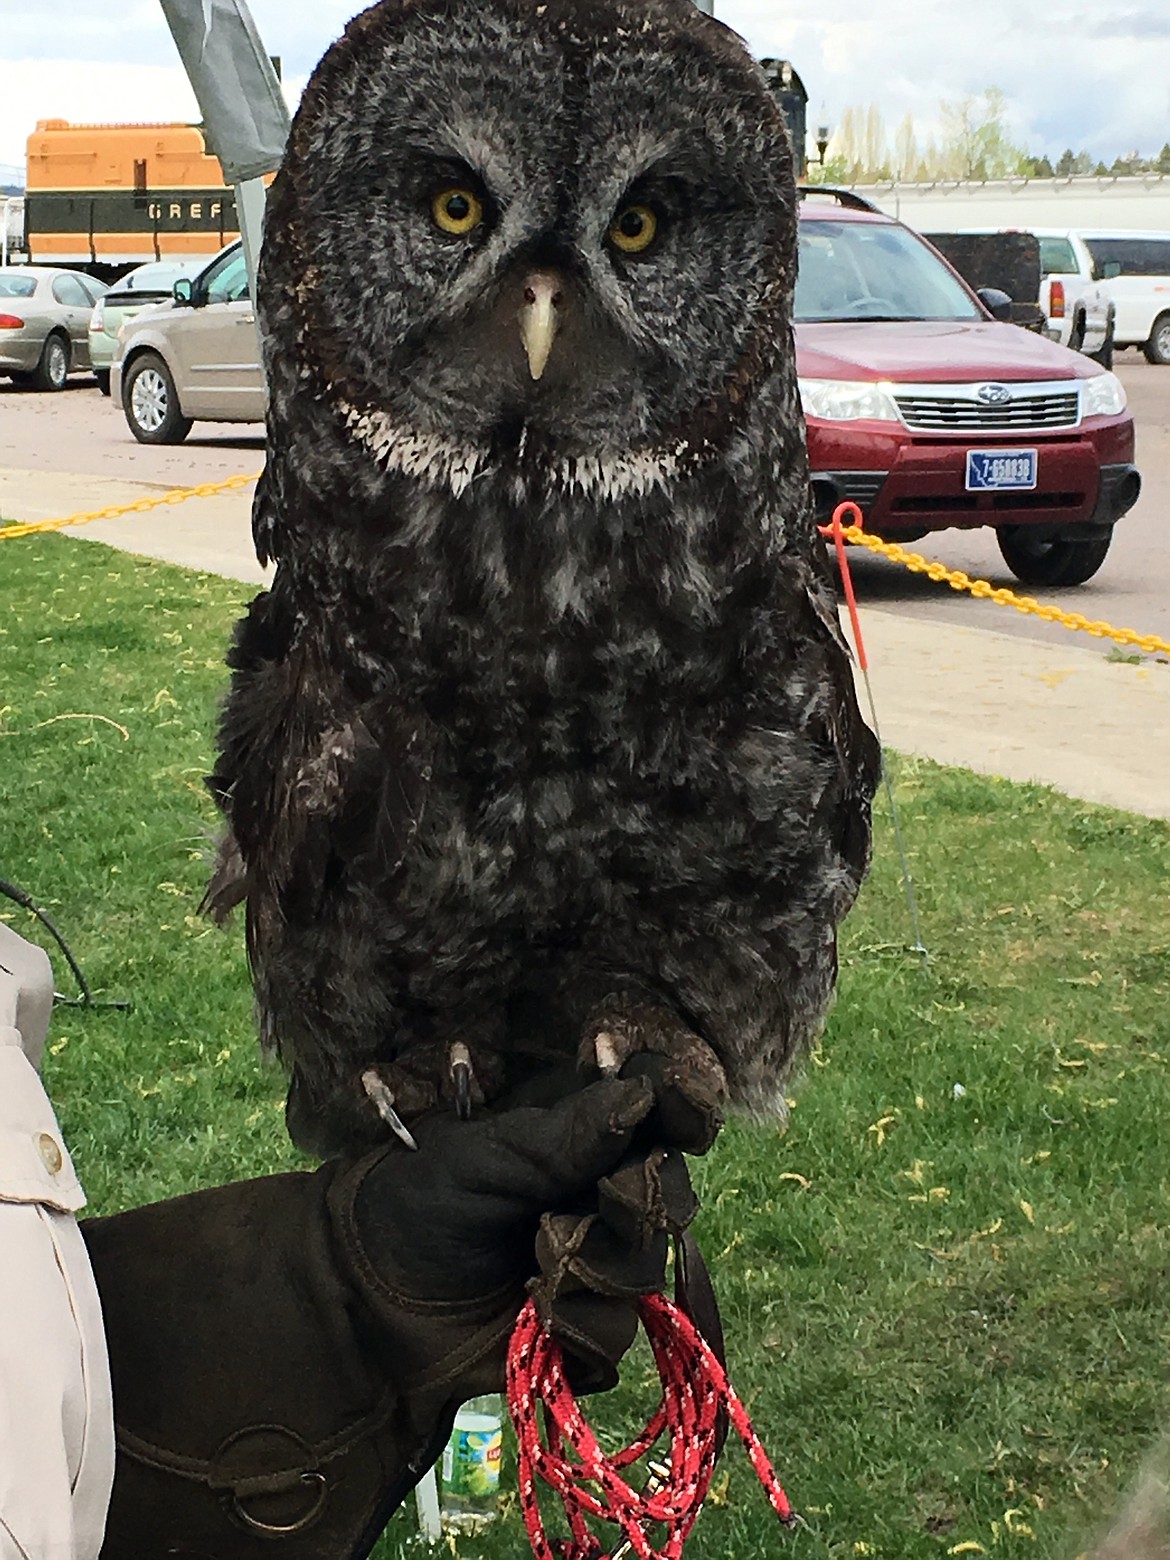 AN OWL, brought over by the Wild Wings Recovery Center, checks out the 2016 Flathead Earth Day celebration.